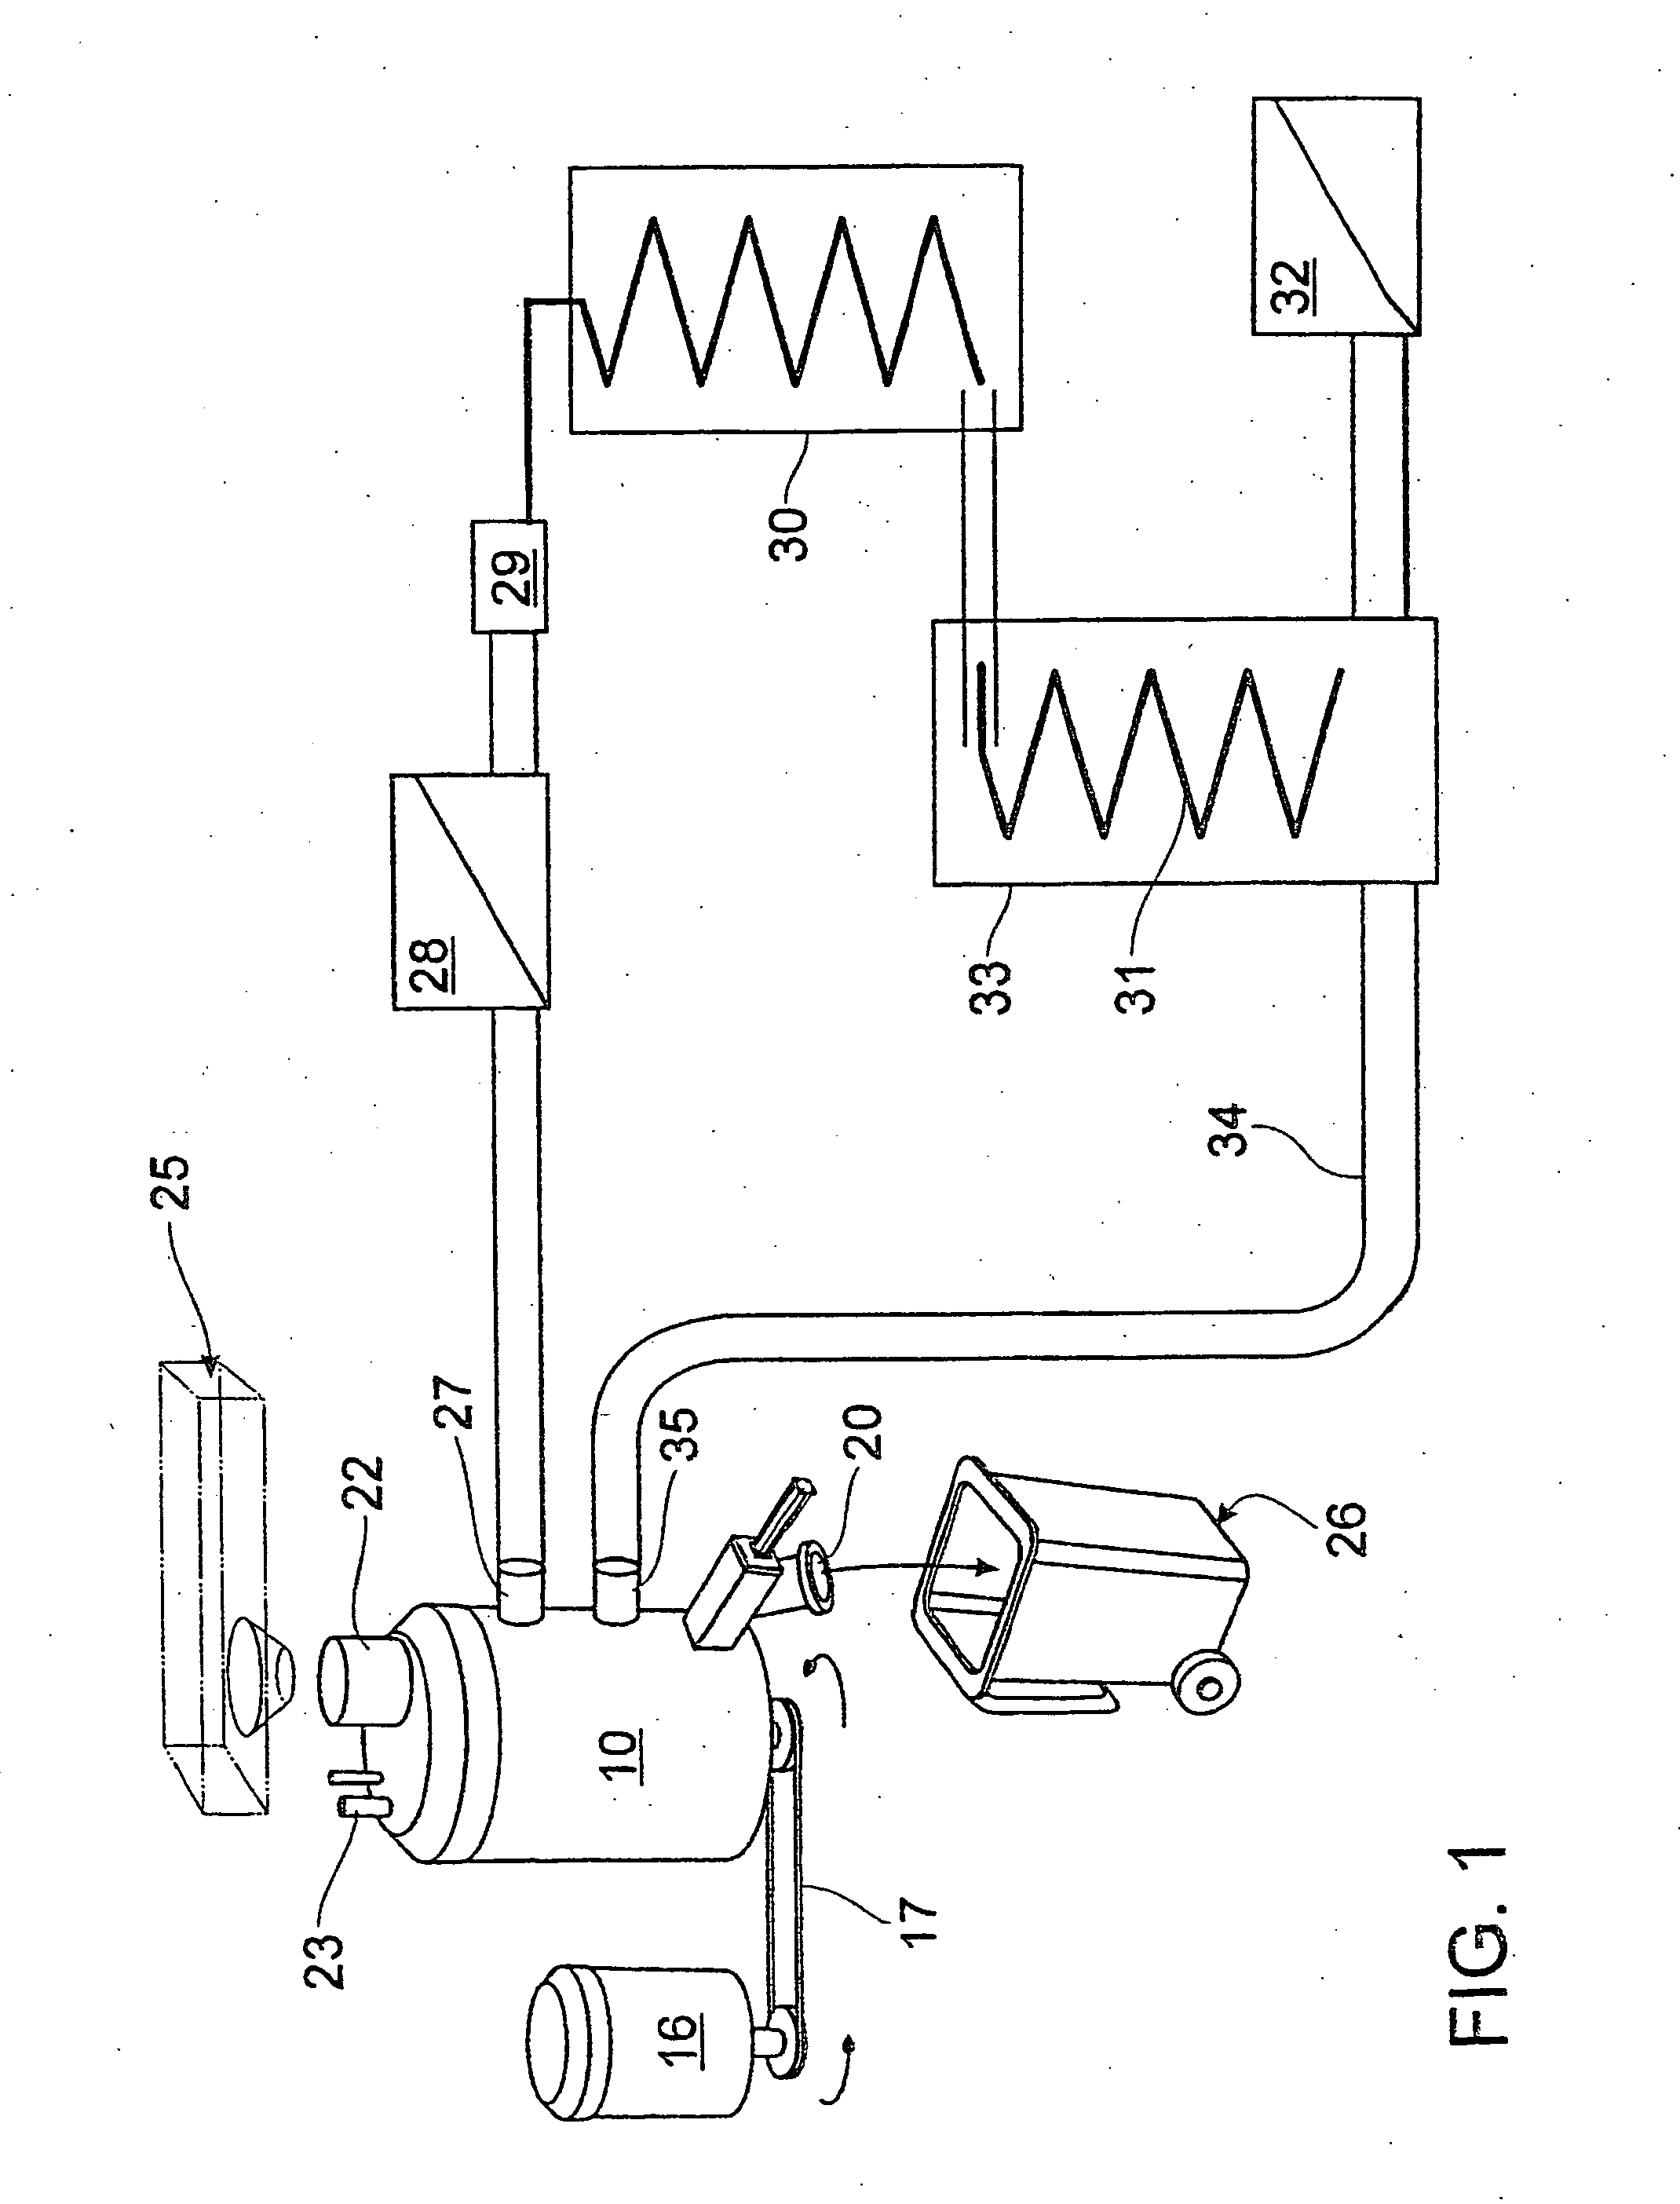 Dispensing unit for ice or snow-like particles